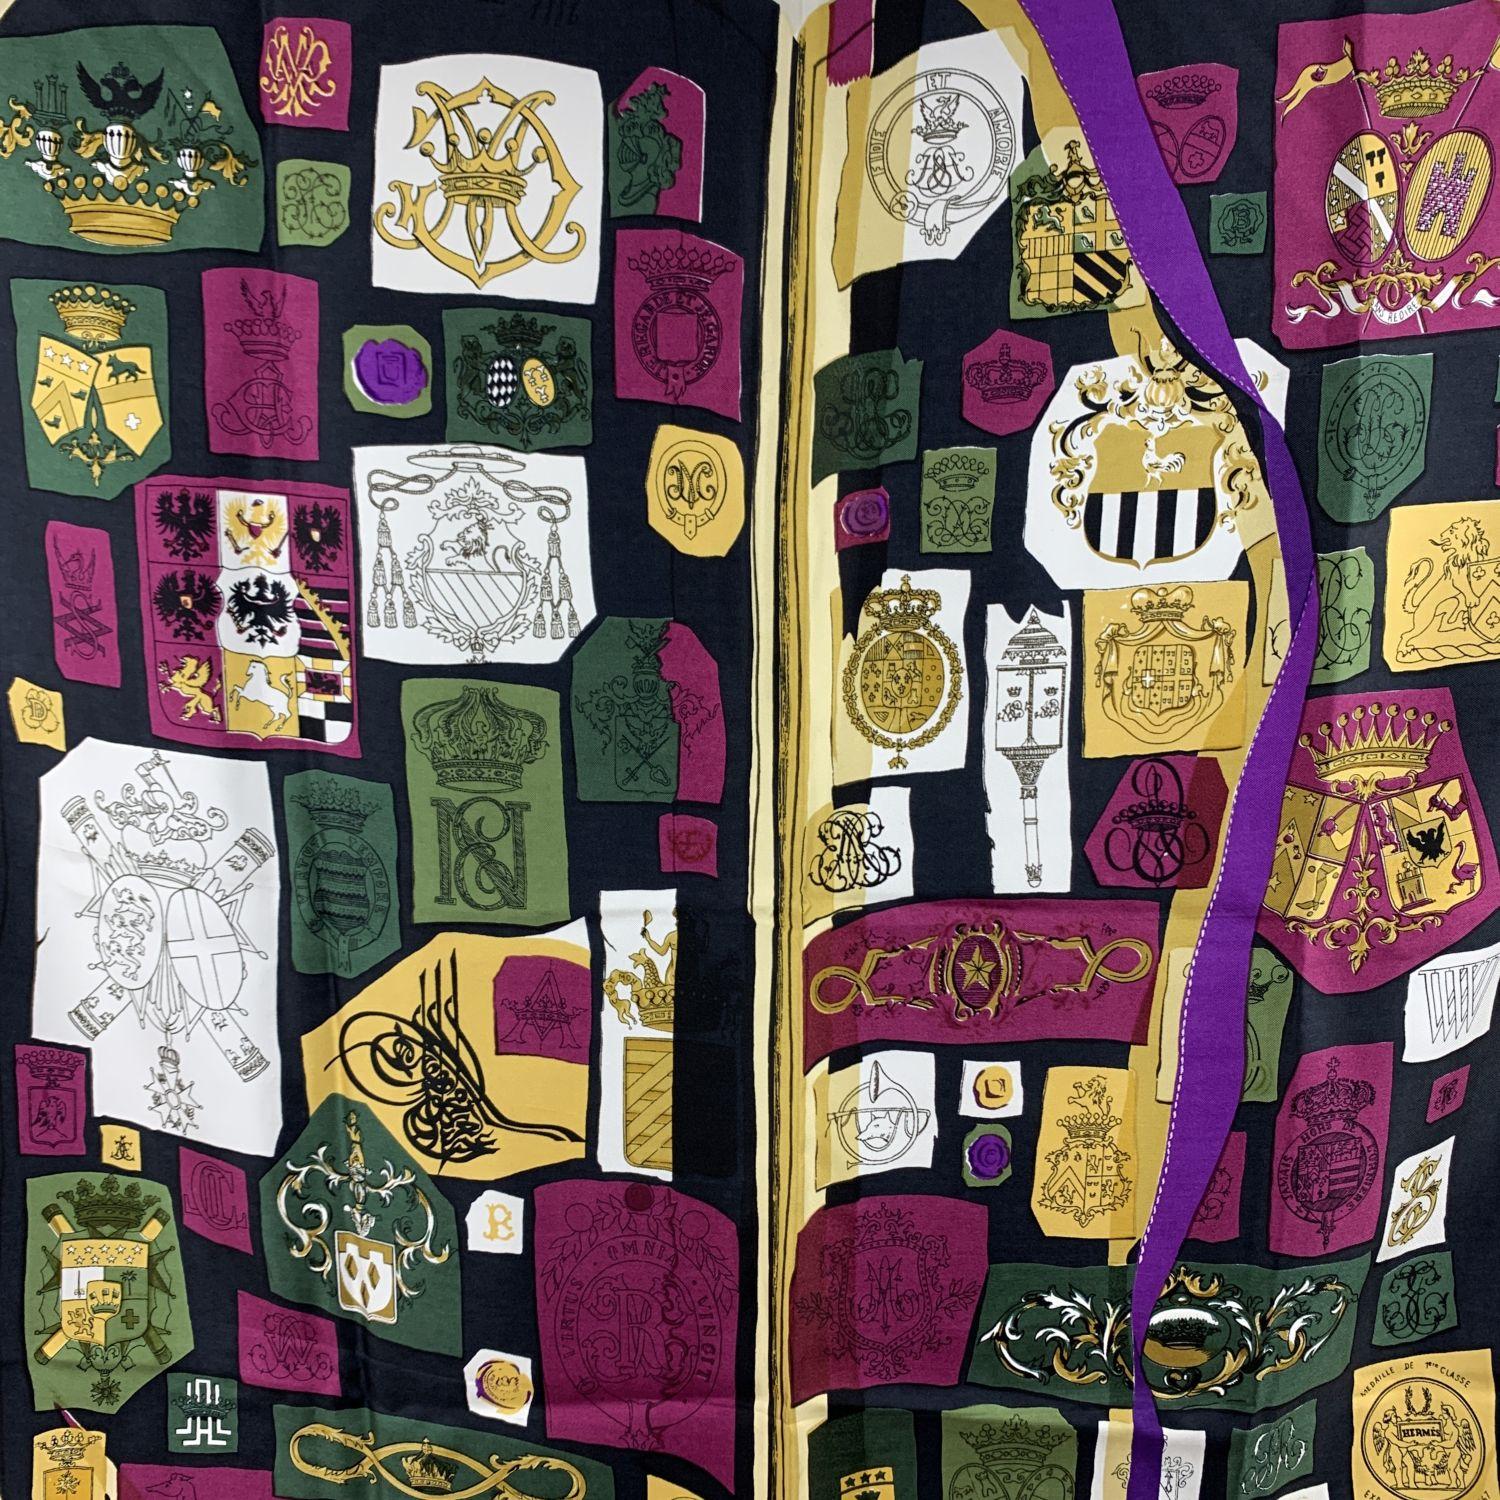 Rare HERMES Silk scarf named 'Chiffres et Monogrammes (Année 1886)', created by artist Lise Coutin. It depicts an open book with various designs of crests and monograms. The scarf was first issued in 1962 and then it was reissued in 1998. This was